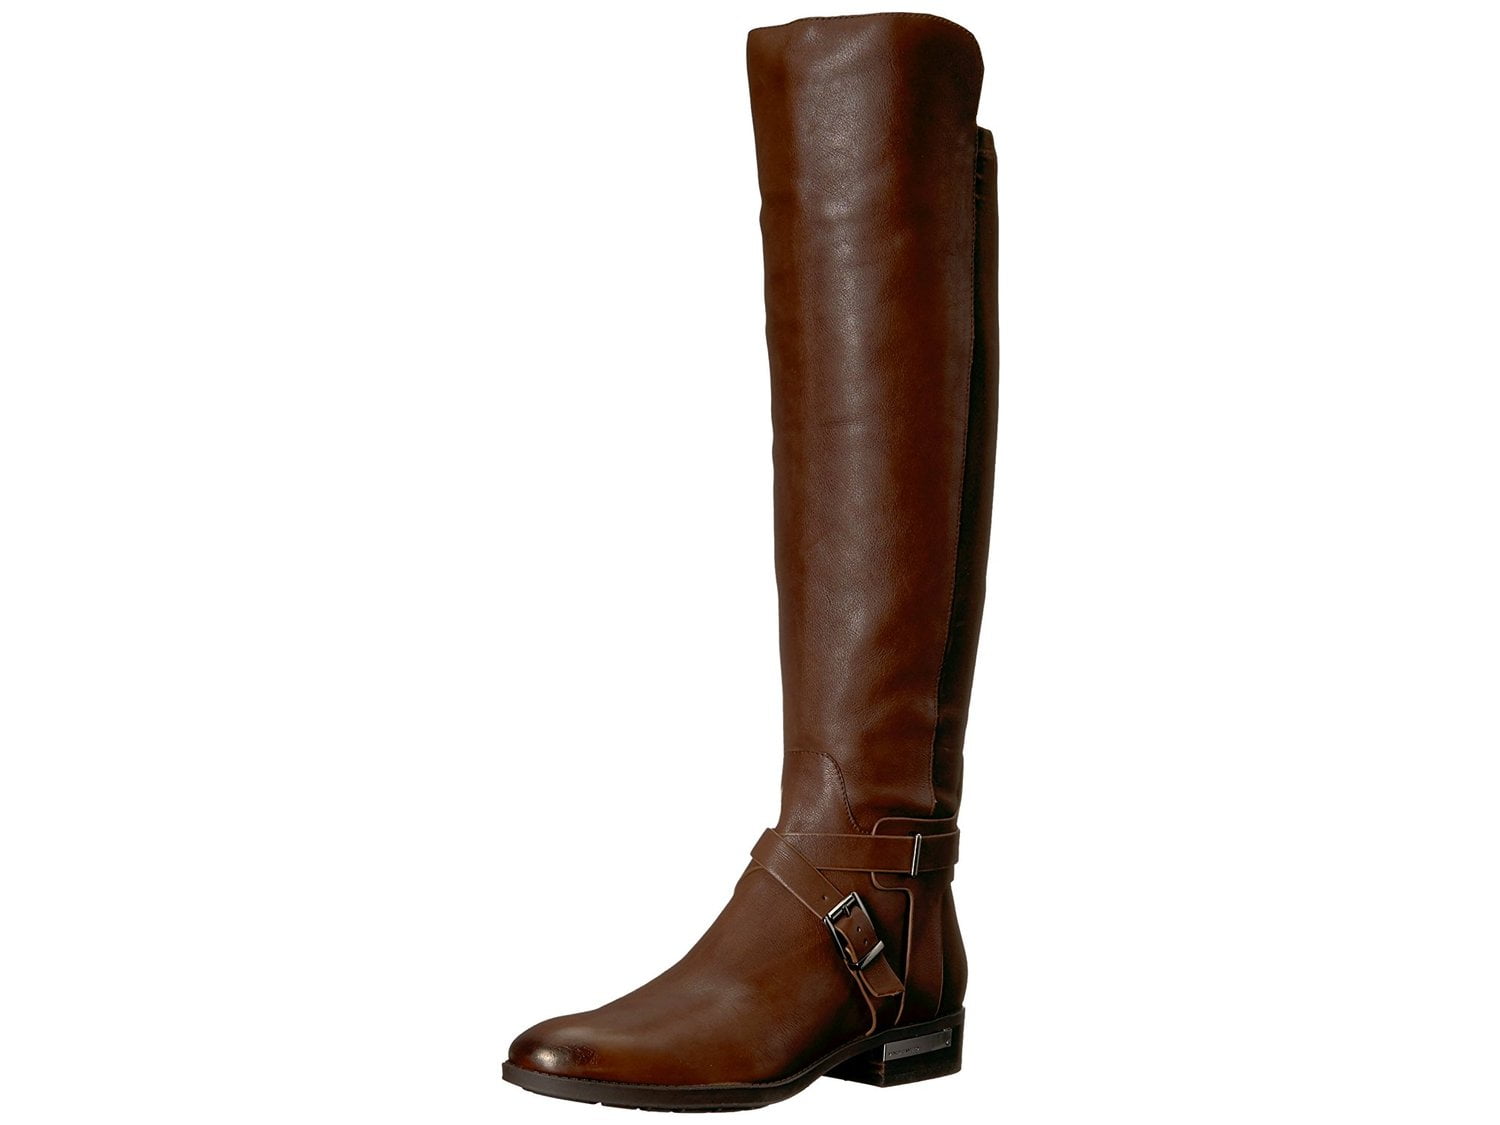 Vince Camuto Womens Paton Leather Closed Toe Knee High Fashion Boots ...